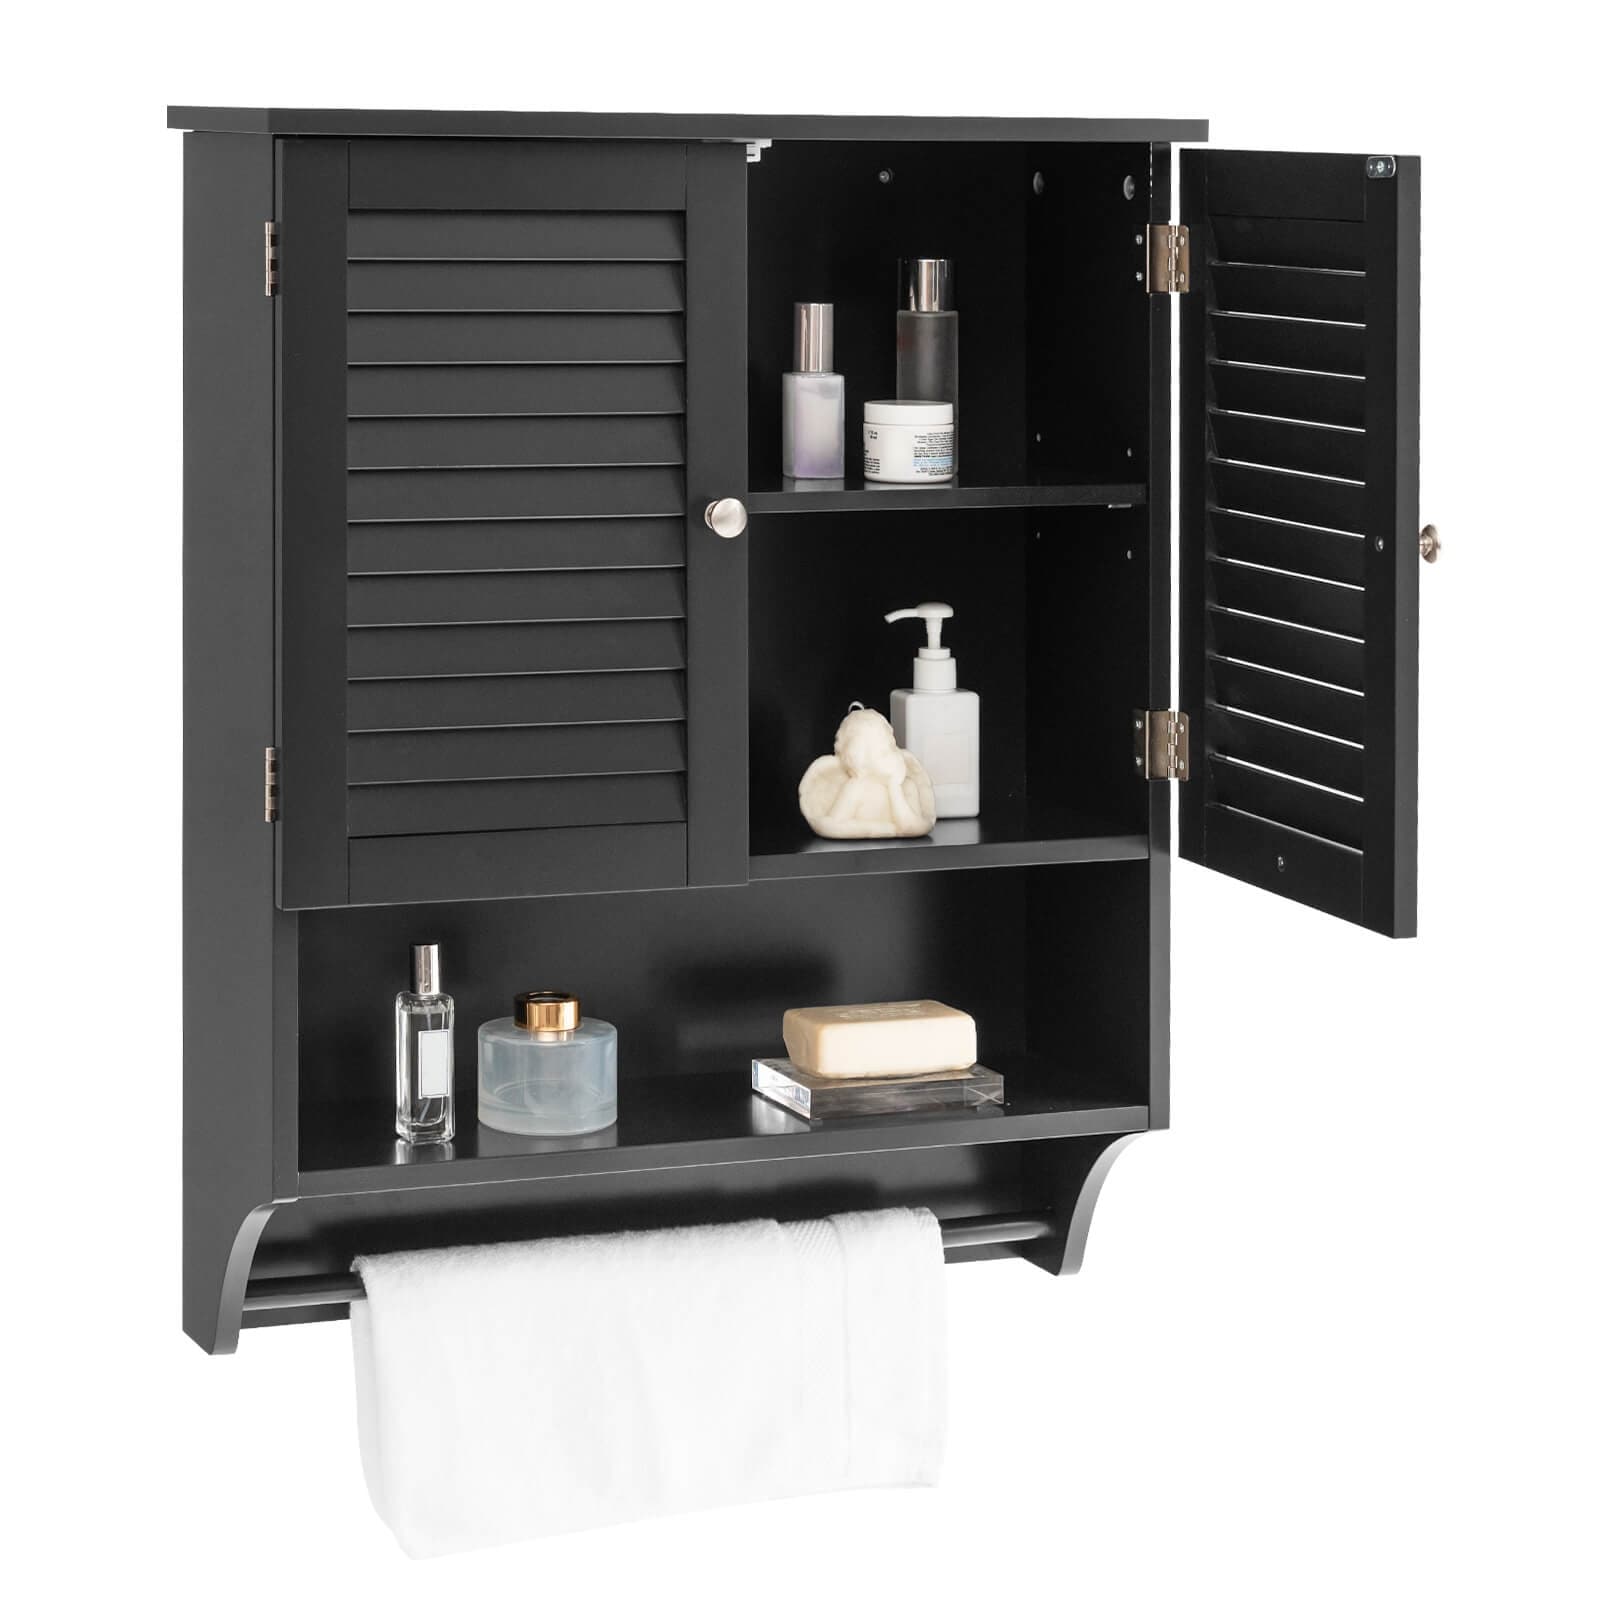 https://ak1.ostkcdn.com/images/products/is/images/direct/9aa0e9fed55fd24744cb0492c39d10f9a799405d/Costway-Bathroom-Wall-Mounted-Medicine-Cabinet-with-Louvered-Doors-%26.jpg